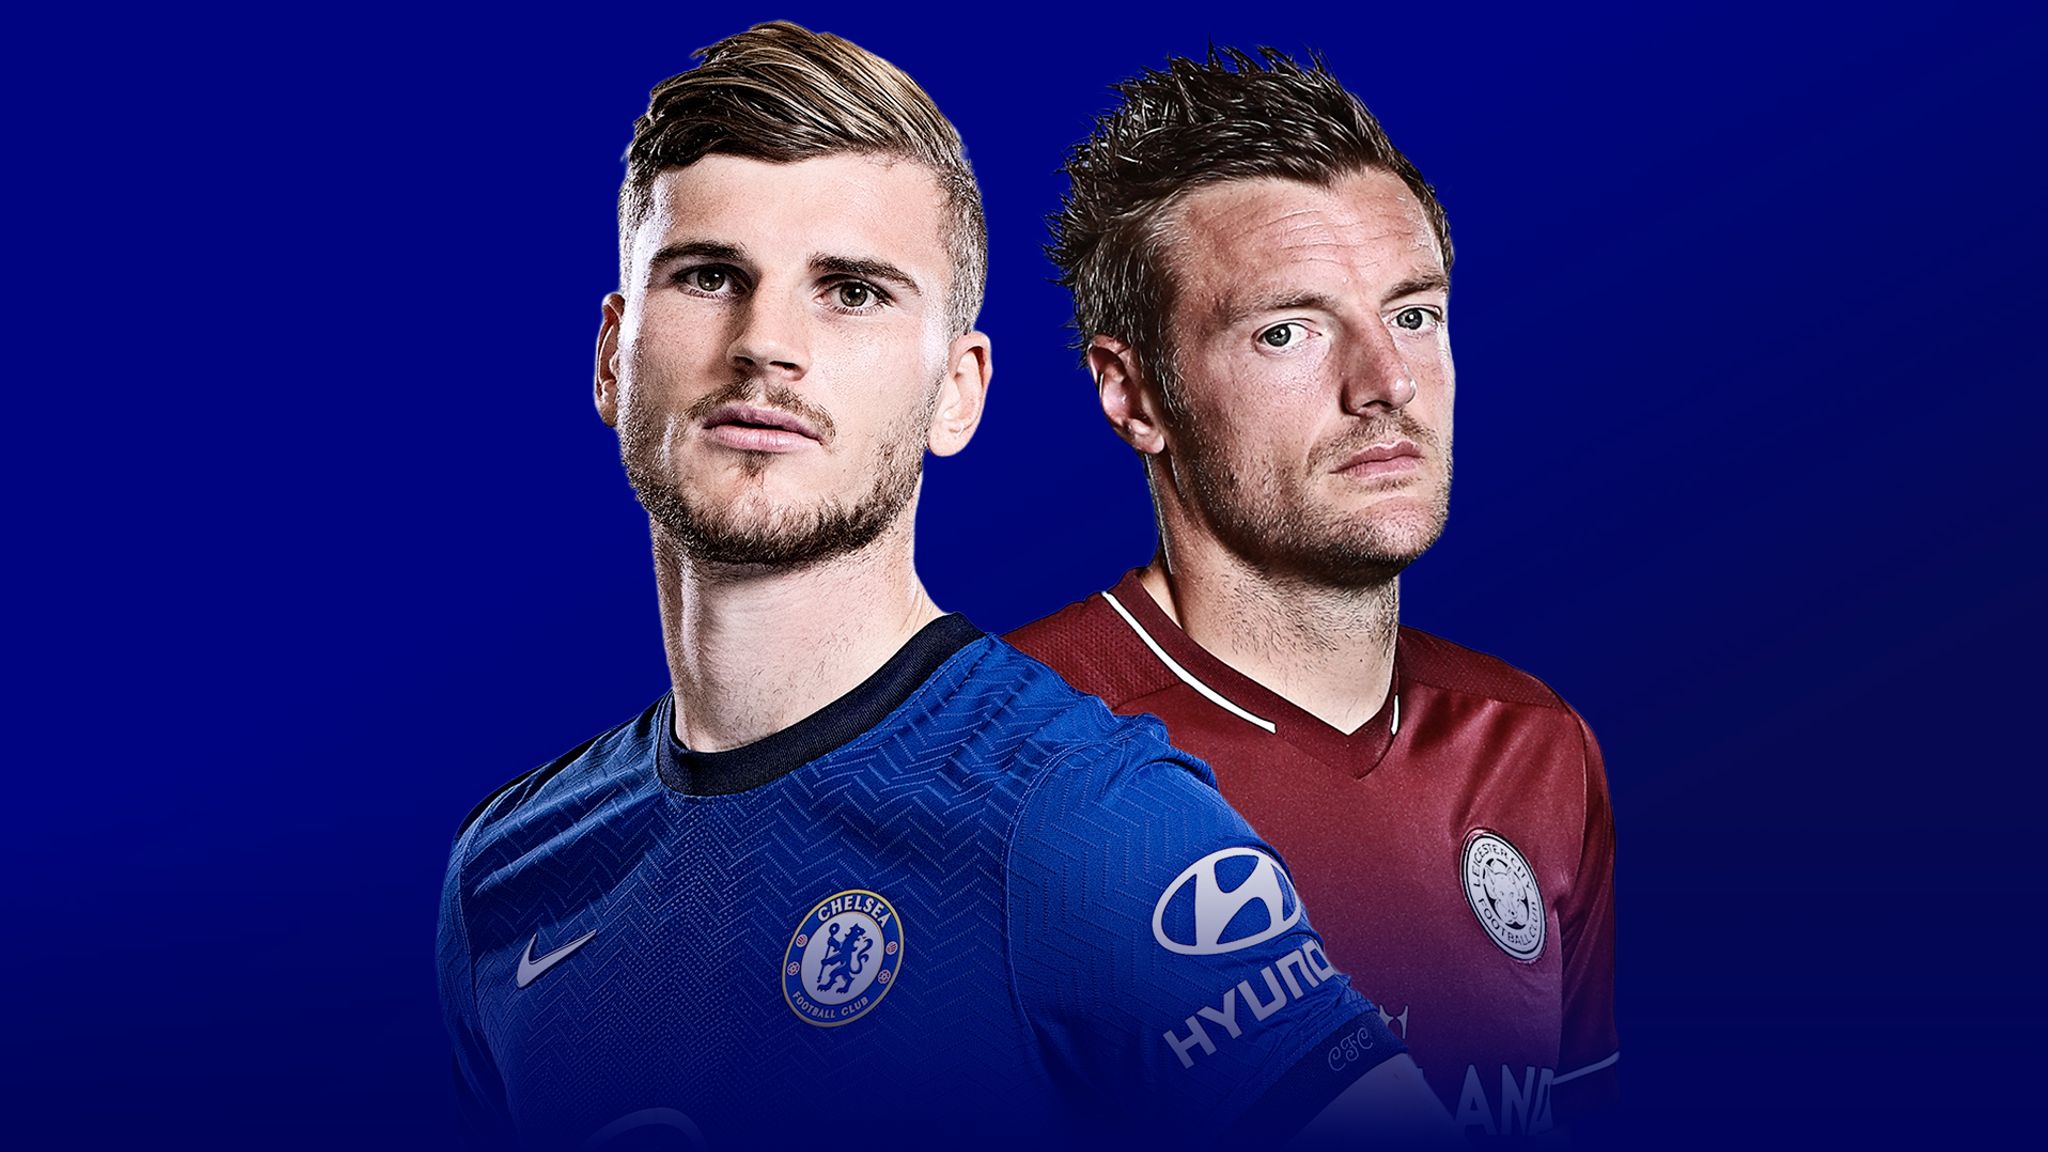 Live match preview - Chelsea vs Leicester 18.05.2021